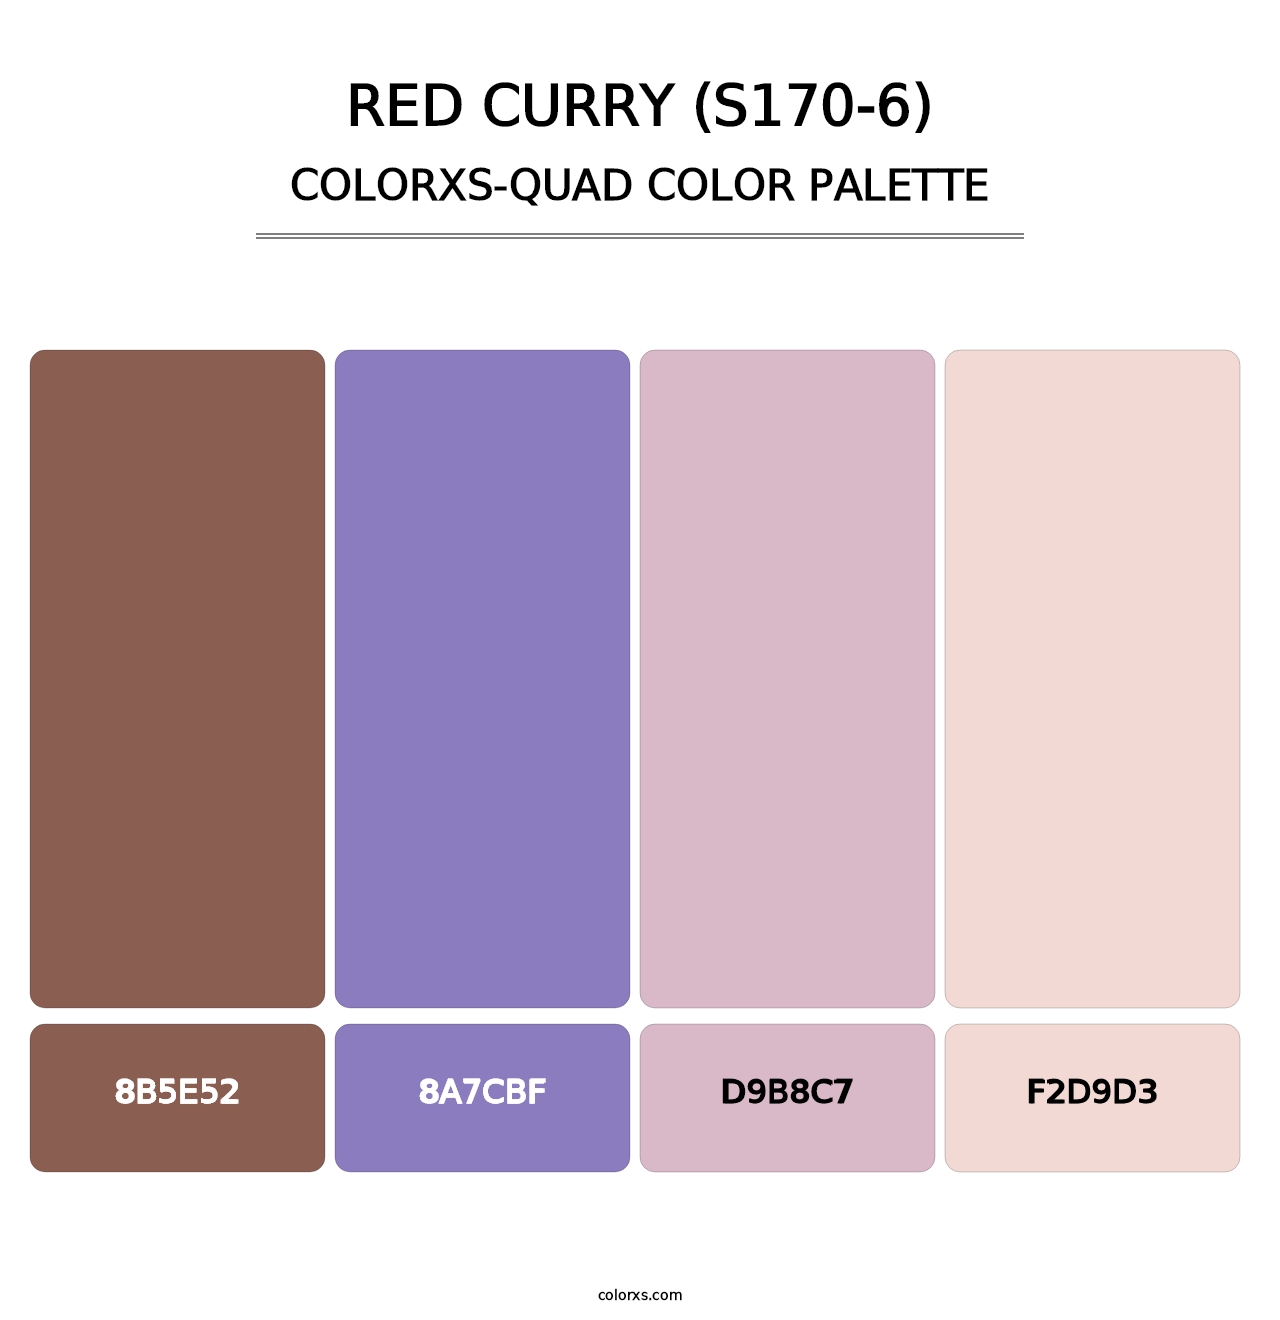 Red Curry (S170-6) - Colorxs Quad Palette